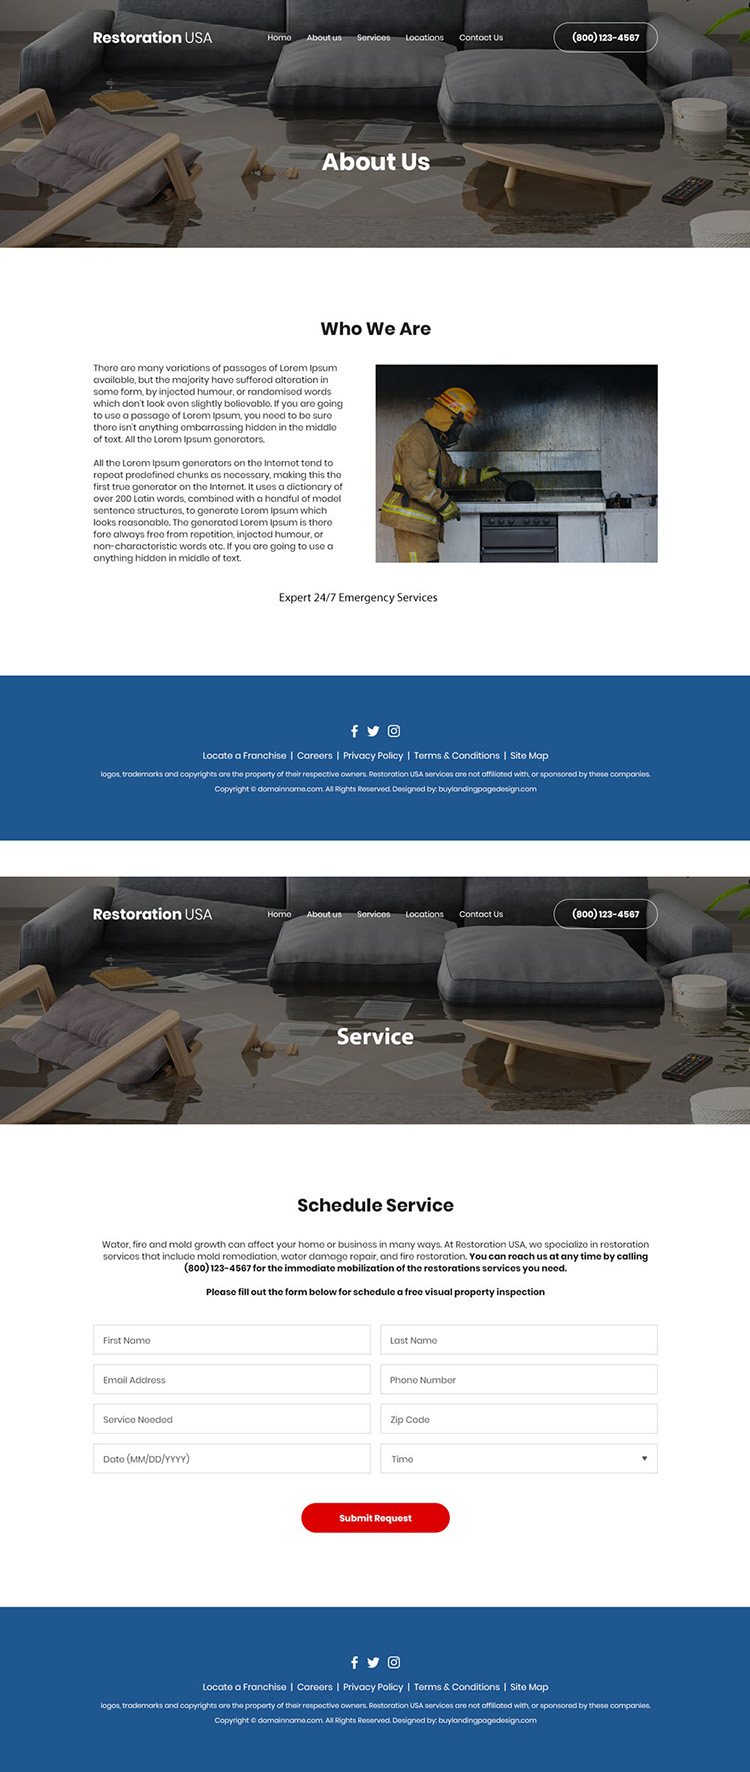 water and fire damage restoration company website design